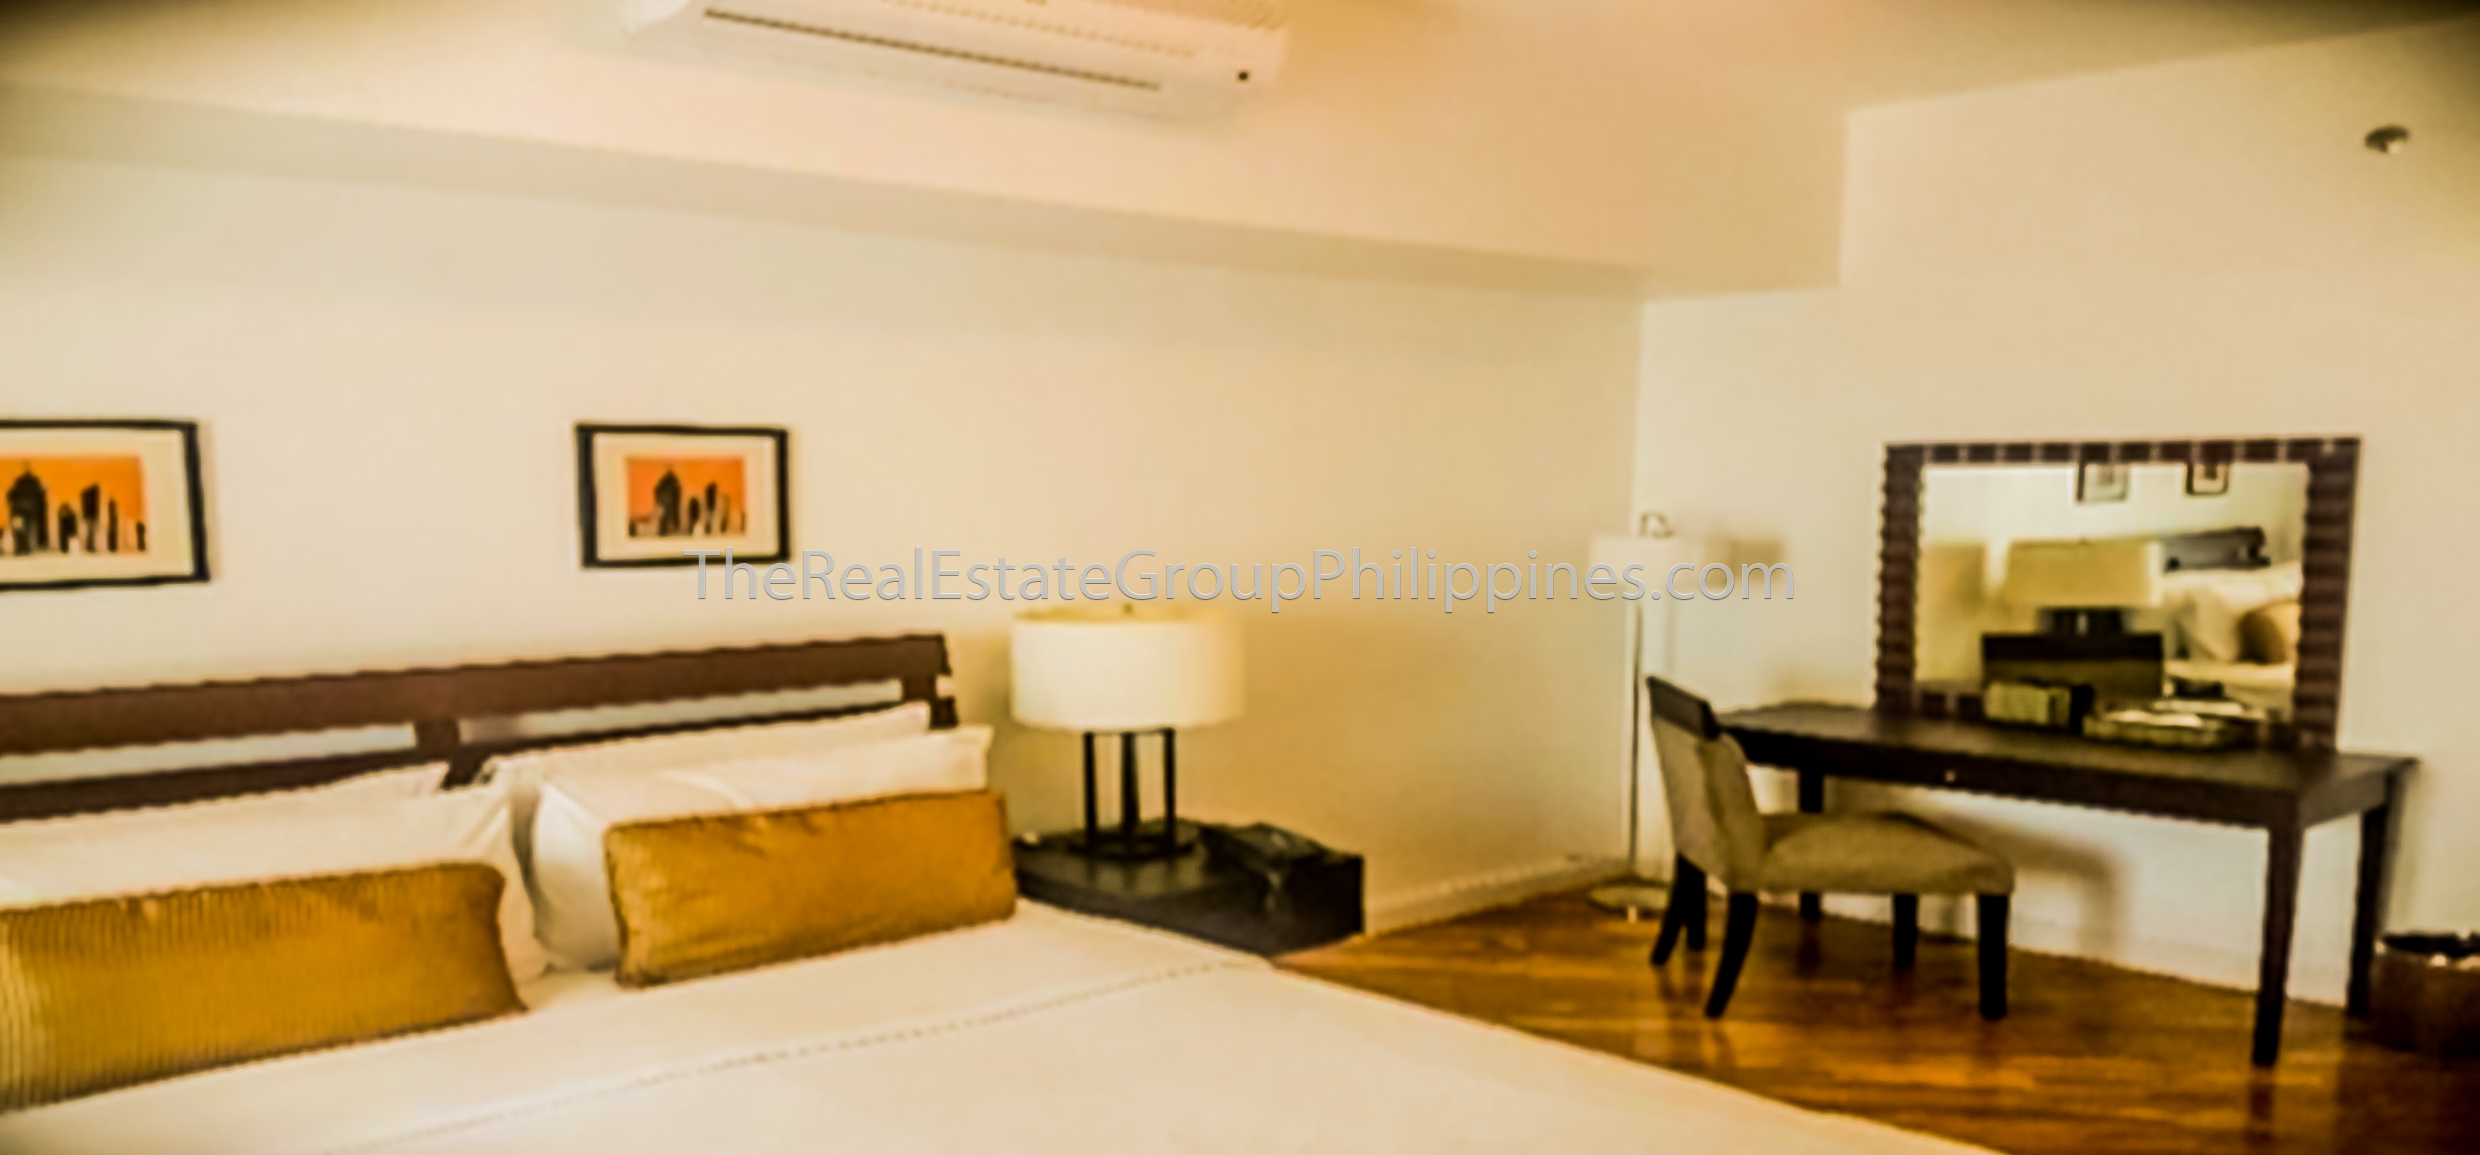 Two Bedroom Condo For Rent Rockwell Makati7